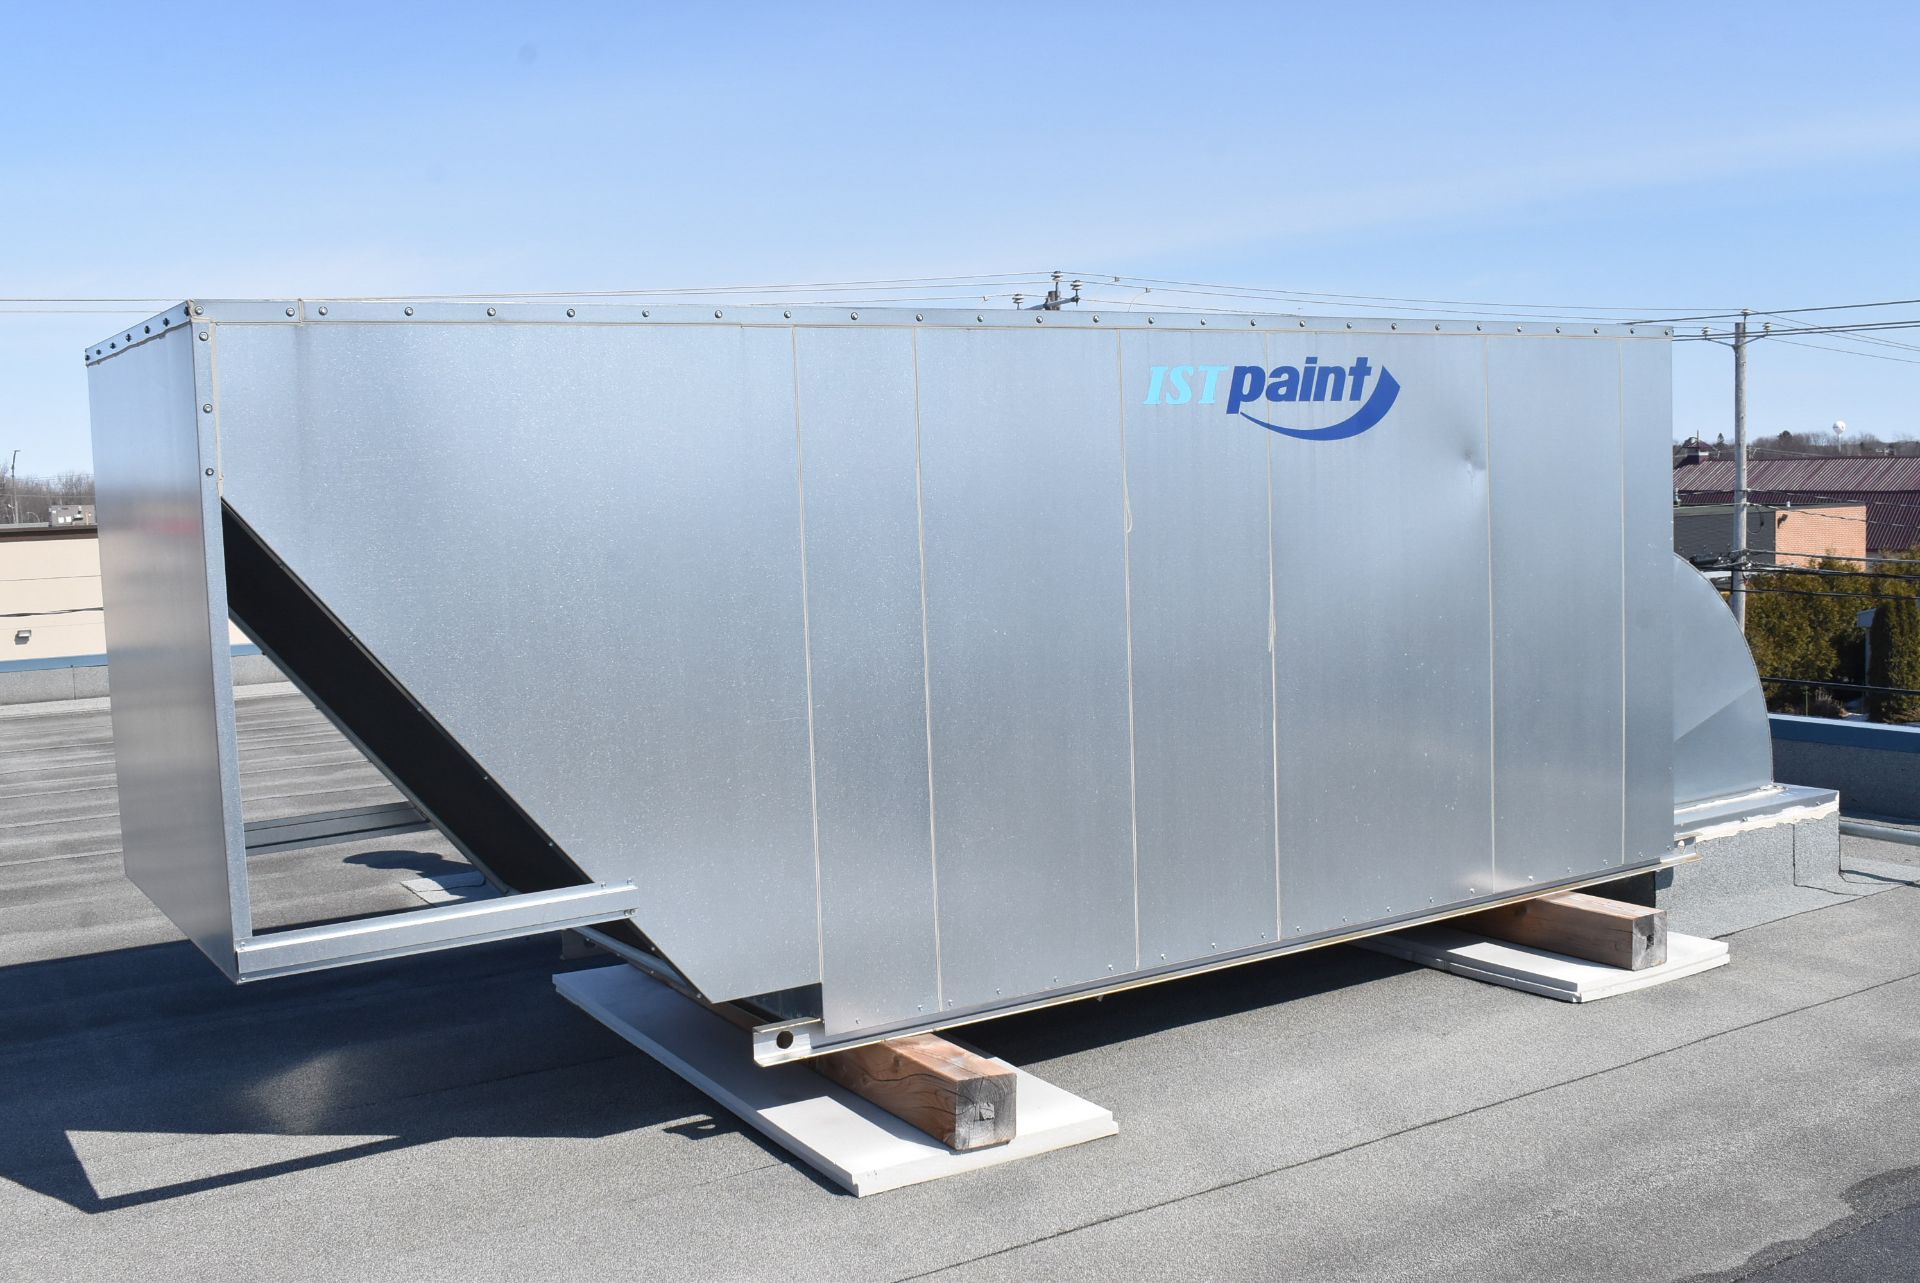 IST PAINT SAB18-SNP NATURAL GAS-FIRED ROOFTOP AIR MAKEUP UNIT WITH 1,21,5000 BTUH MAX. FIRING - Image 2 of 3